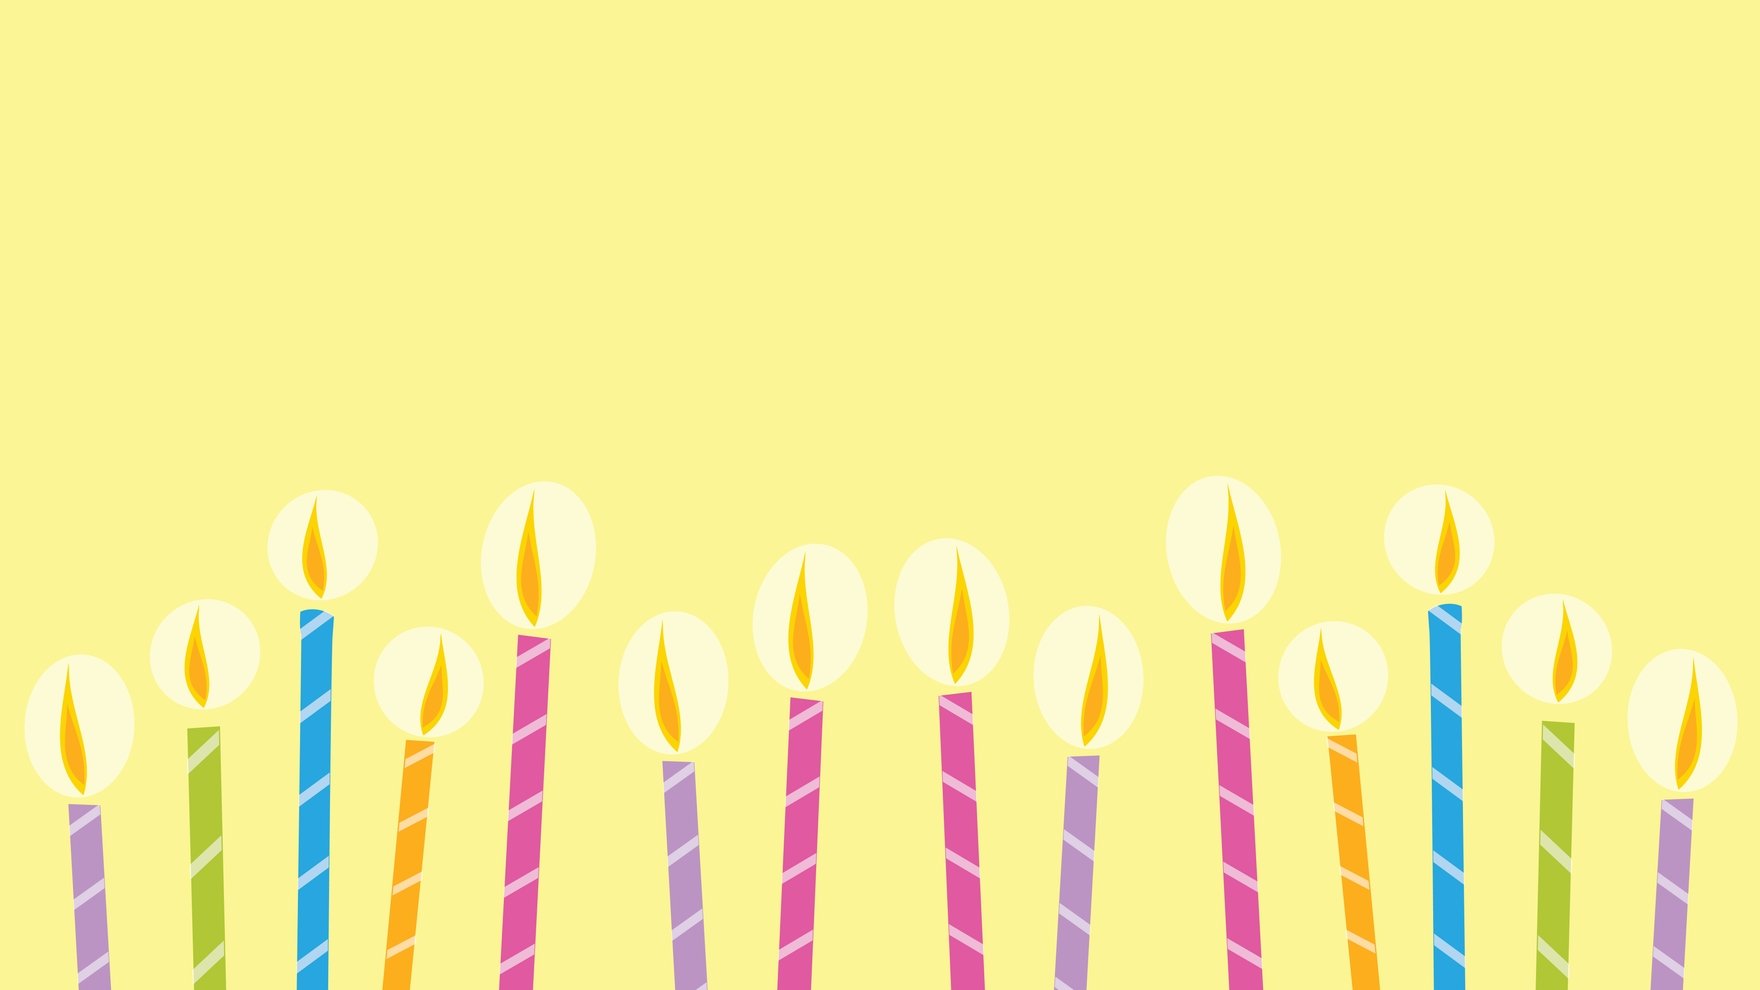 Birthday Candle Background in Illustrator, EPS, SVG, JPG, PNG